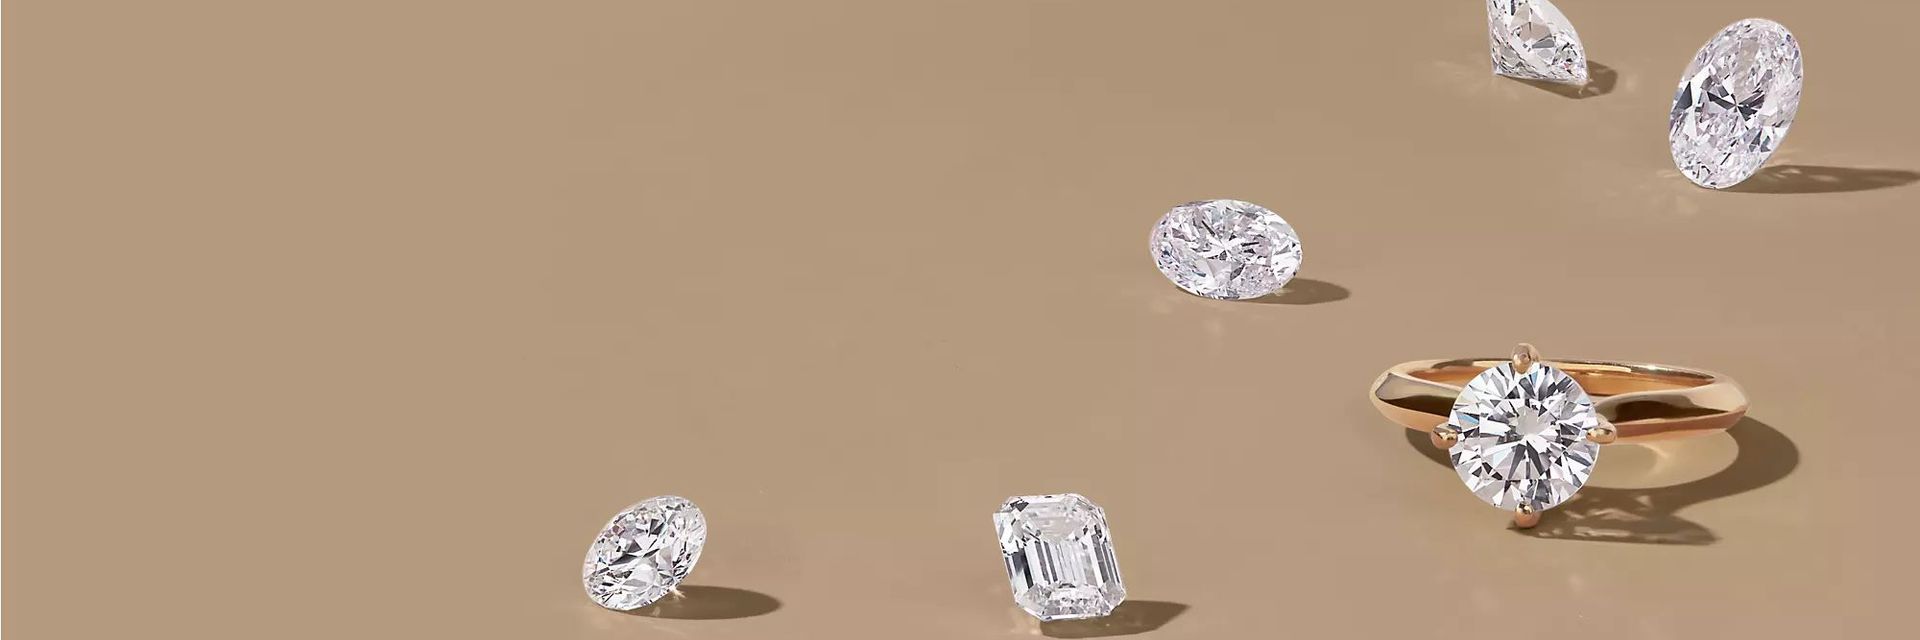 Techniques for Collectors : Tools to identify diamonds